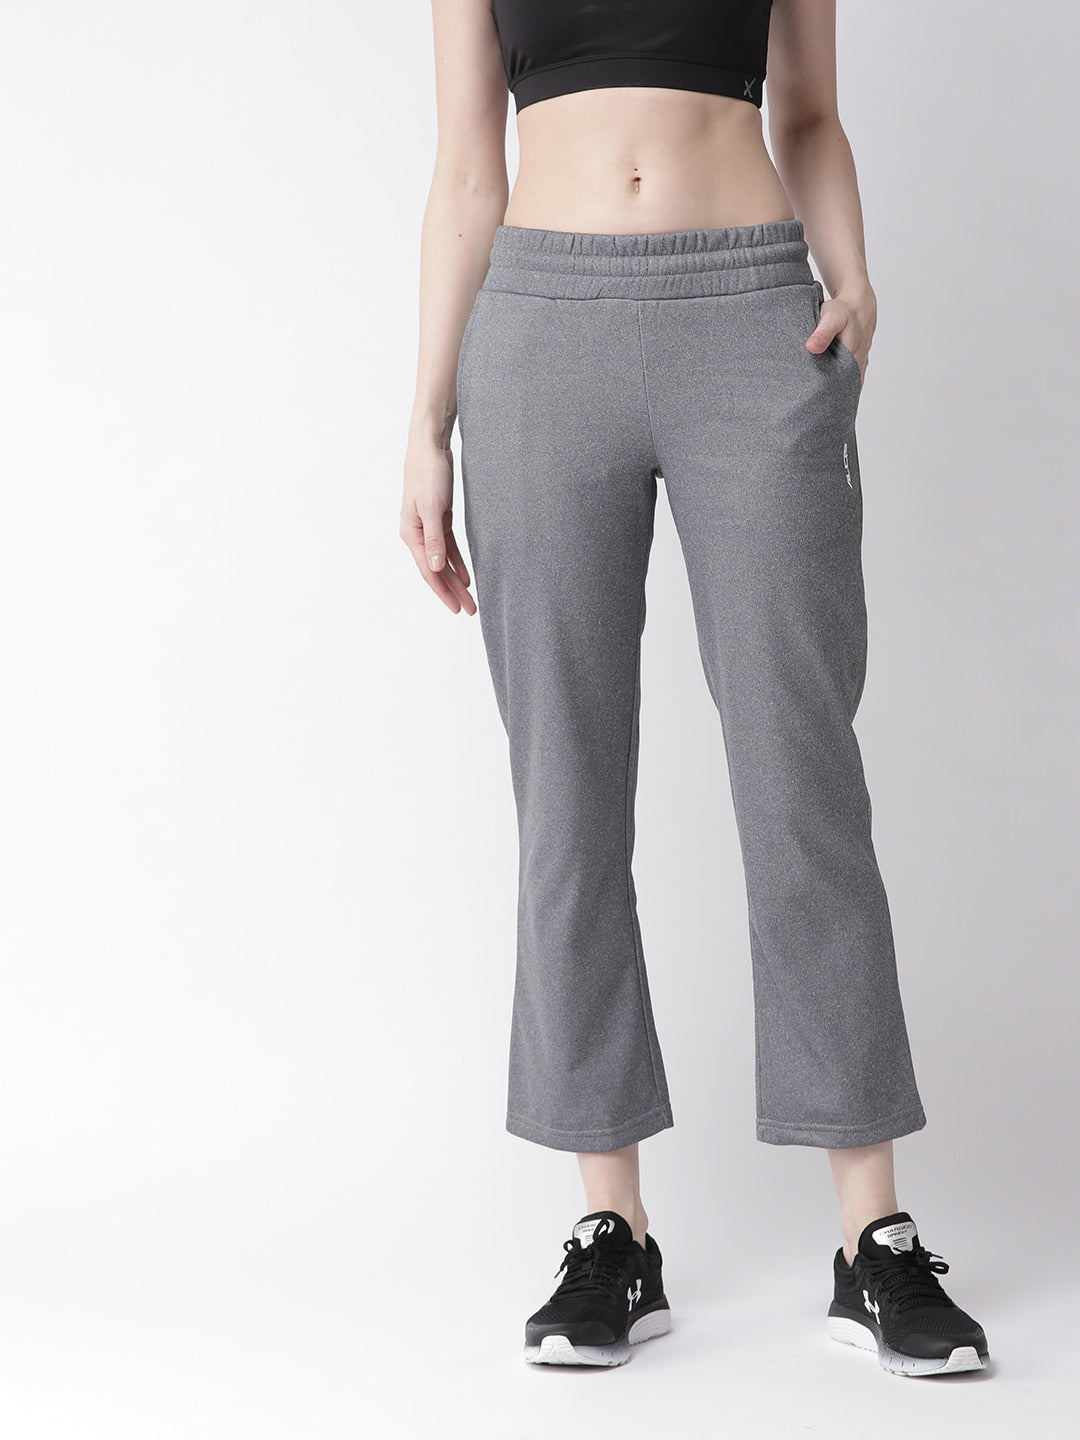 Alcis Women Grey Solid Slim Fit Cropped Track Pants ALWSTPN01003-S